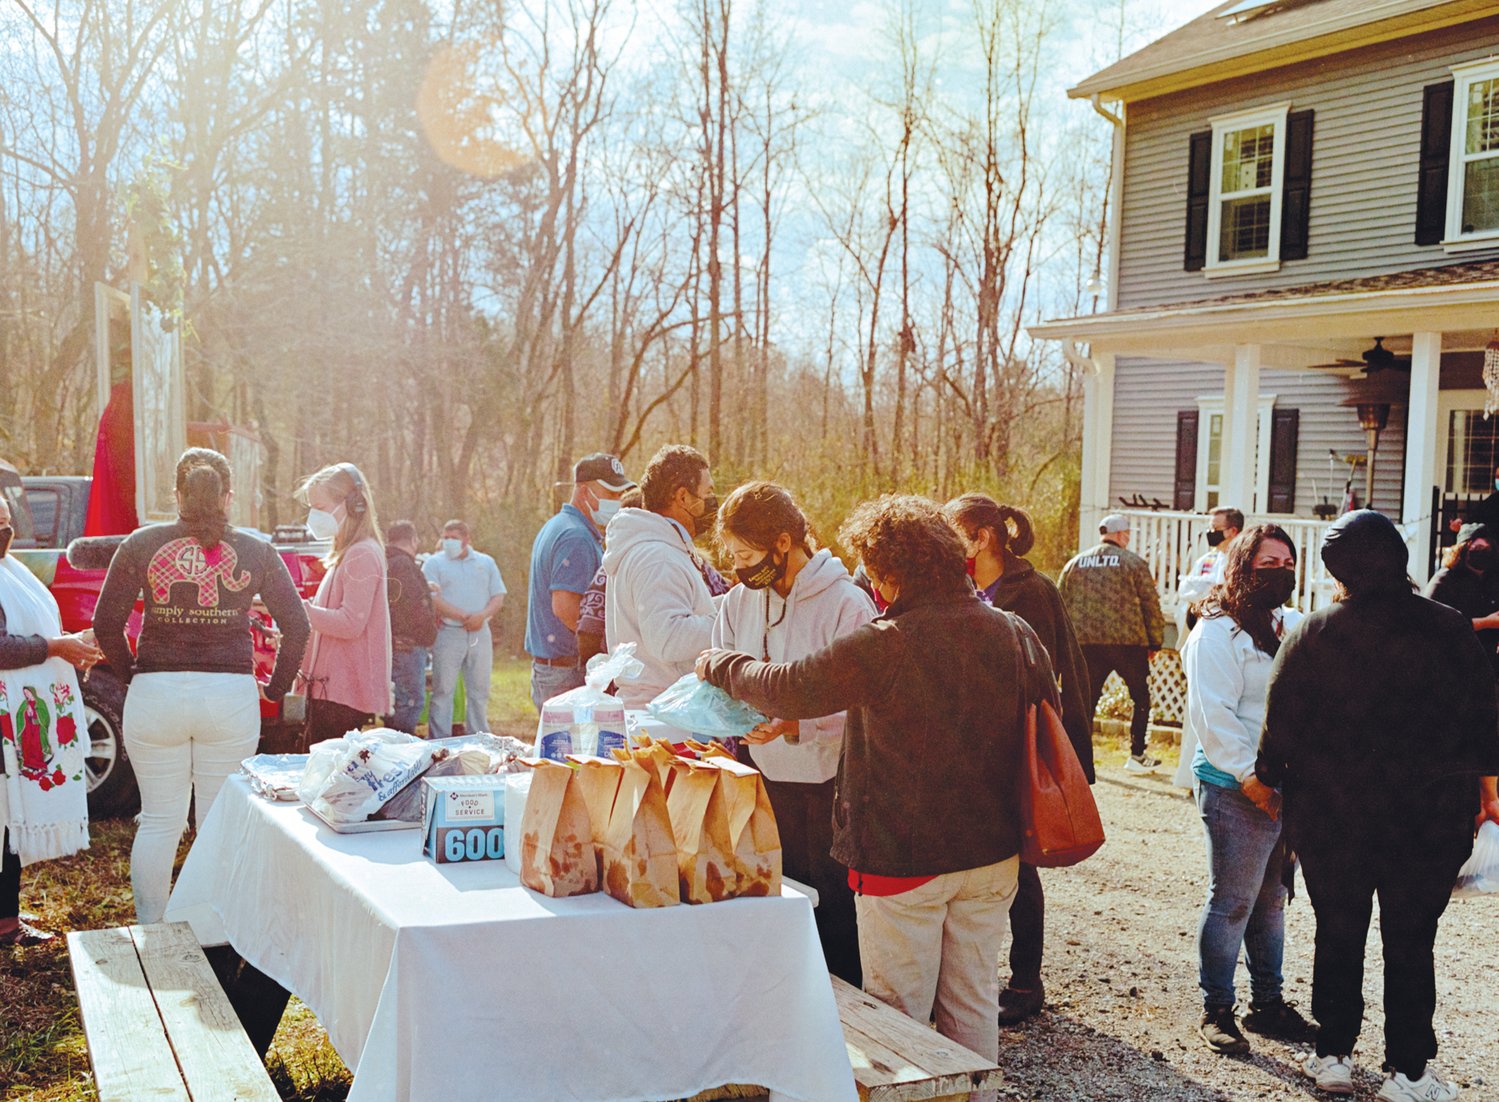 A family set up a table lined with bags filled with Colombian empanadas and trays with bunched meals. There were also cups of coffee available for those who wanted it.